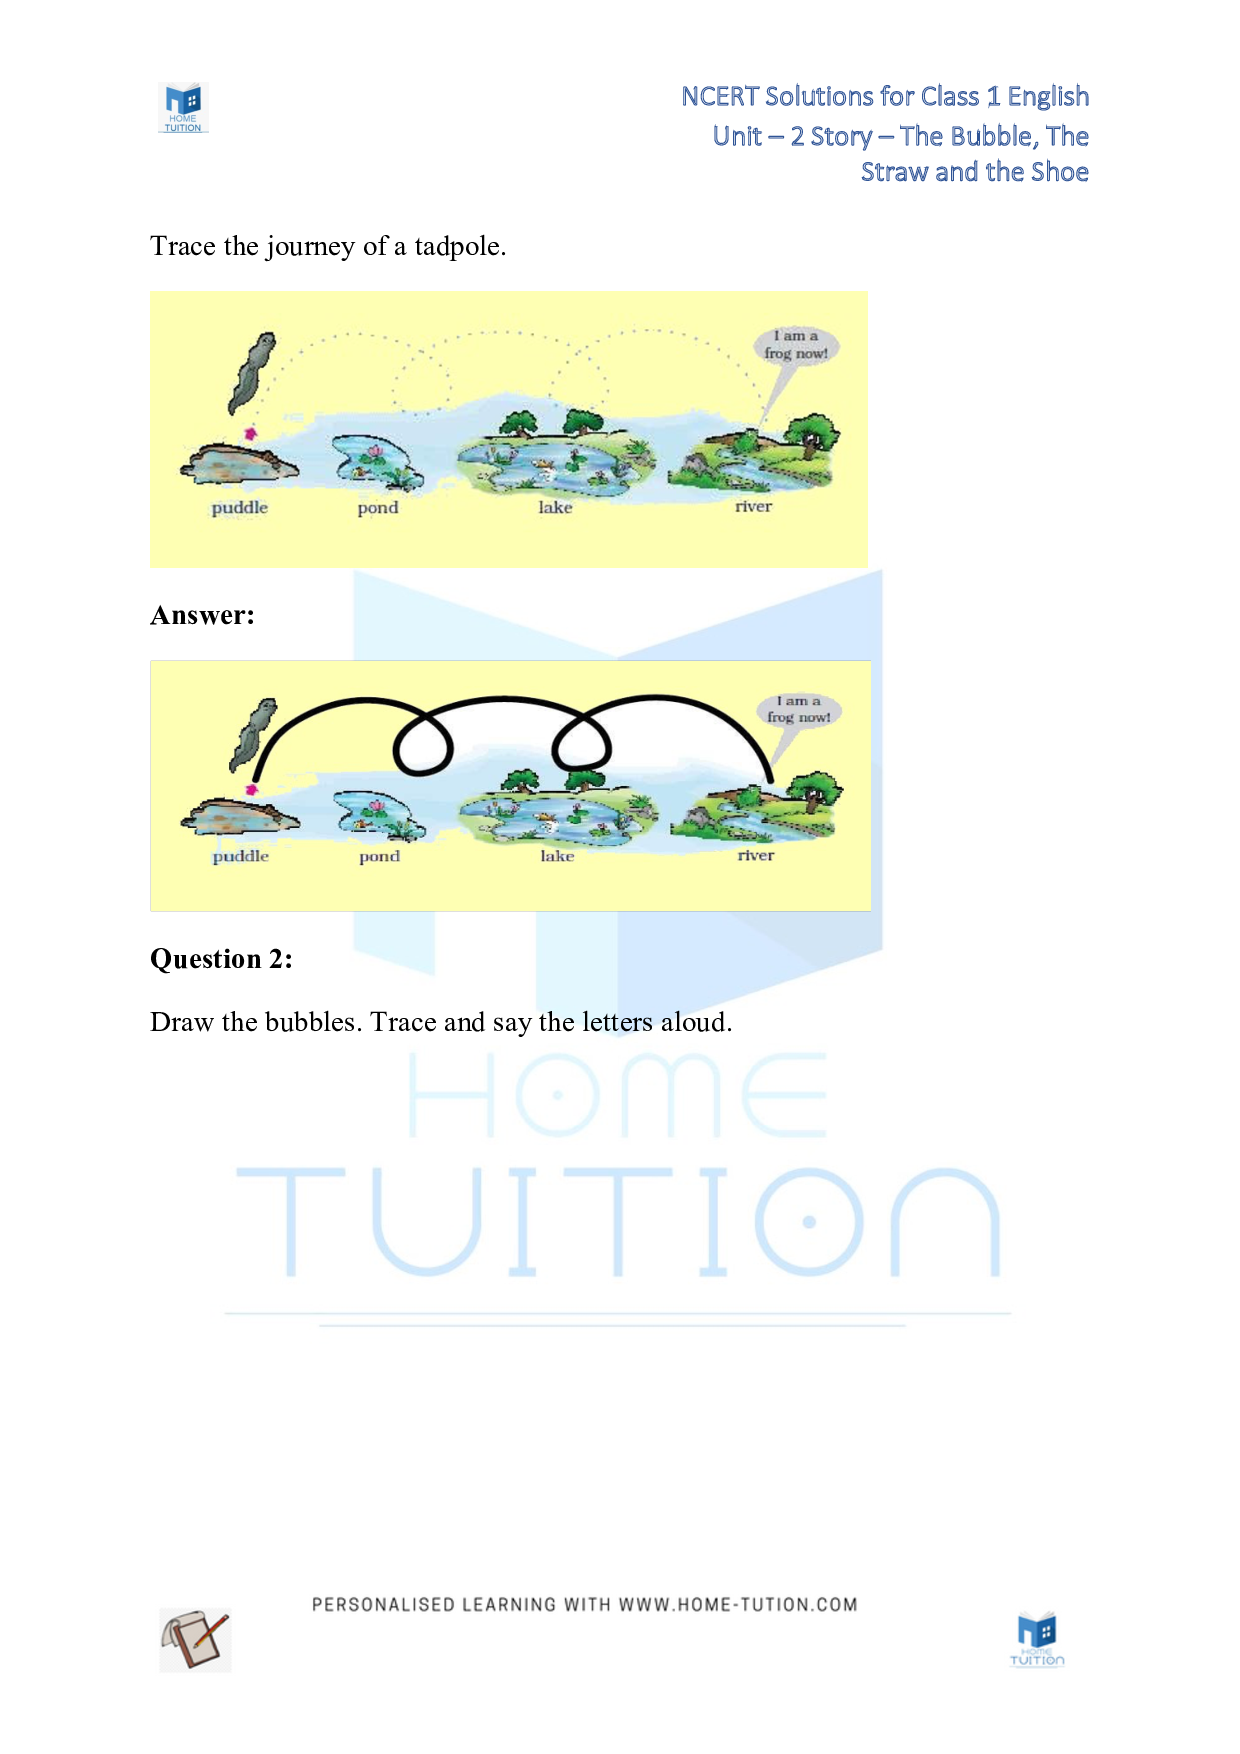 NCERT Solutions for Class 1 English Unit 2 Story - The Bubble, the Straw and the Shoe